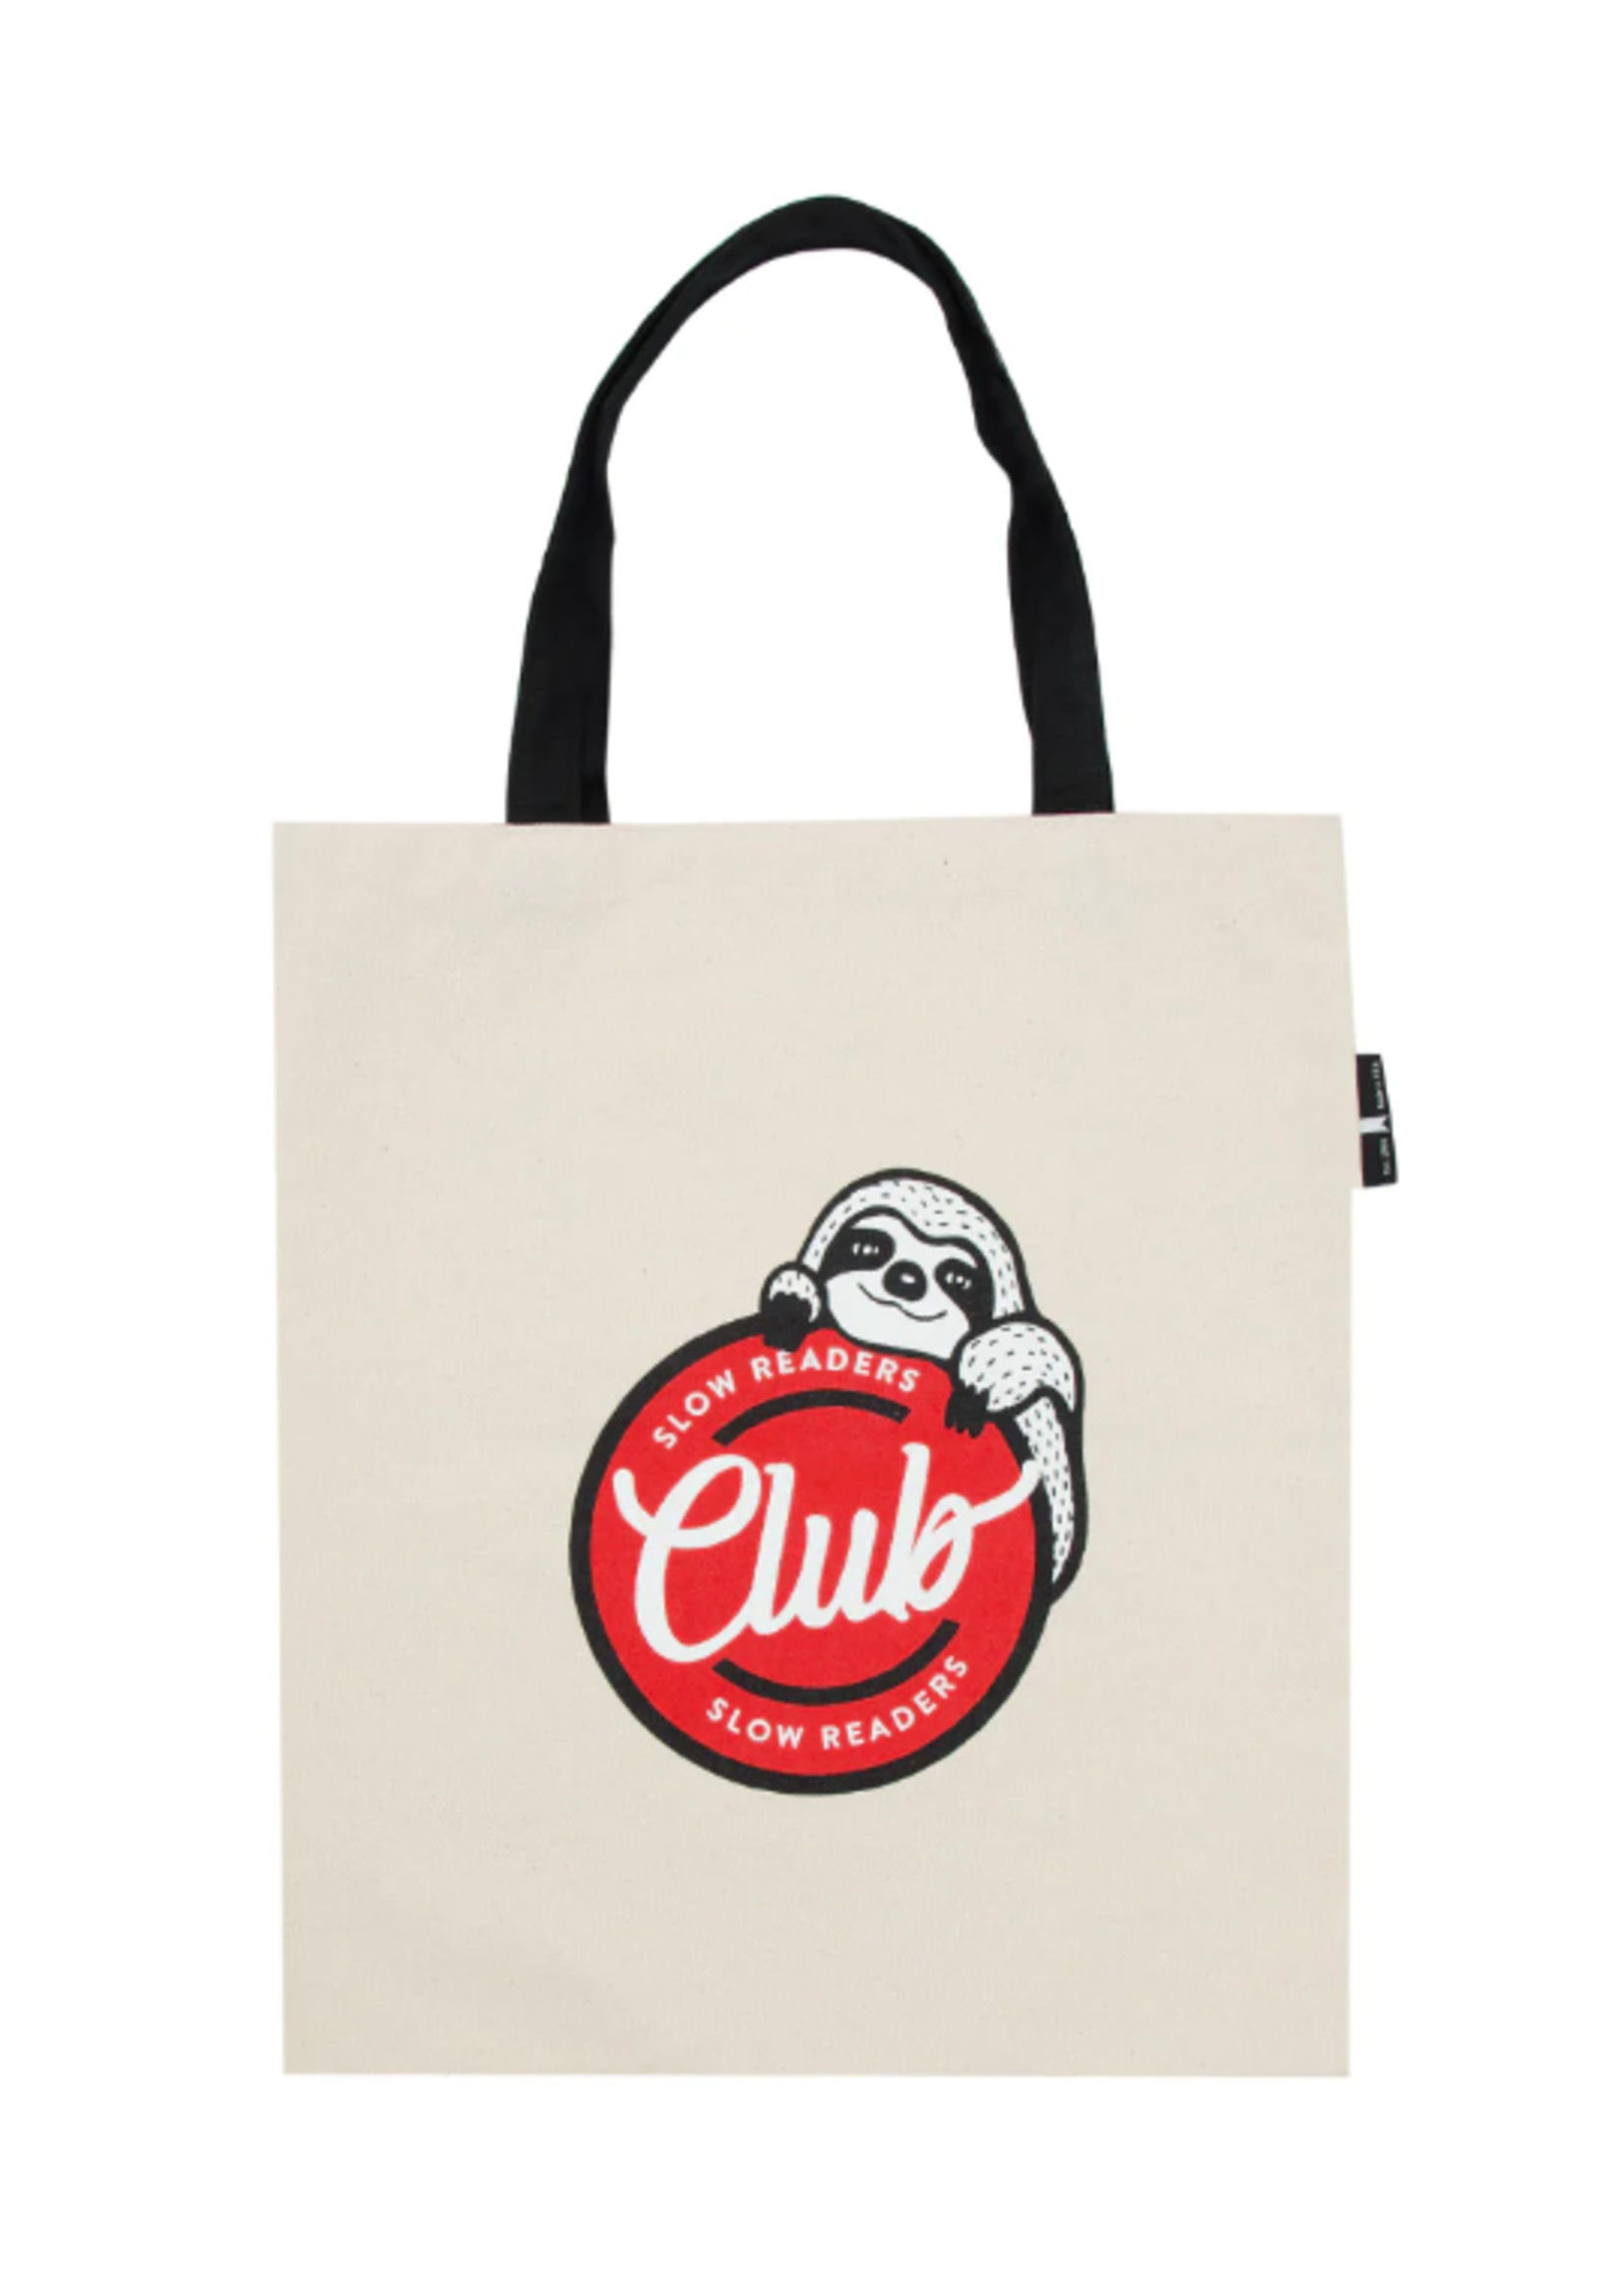 Out of Print Book Sloth Tote